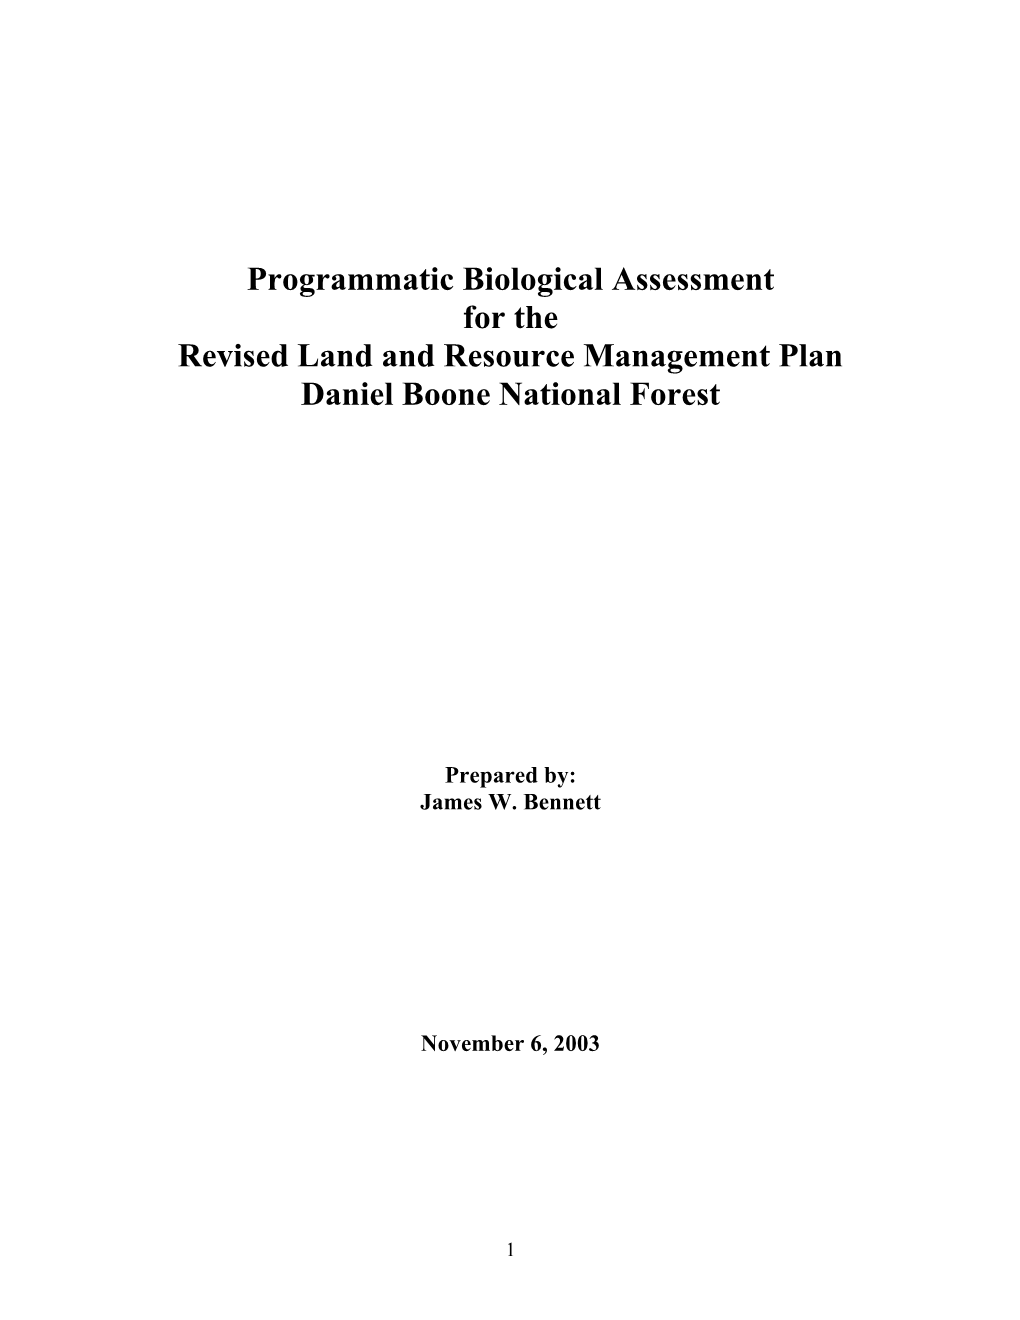 Programmatic Biological Assessment for the Revised Land and Resource Management Plan Daniel Boone National Forest